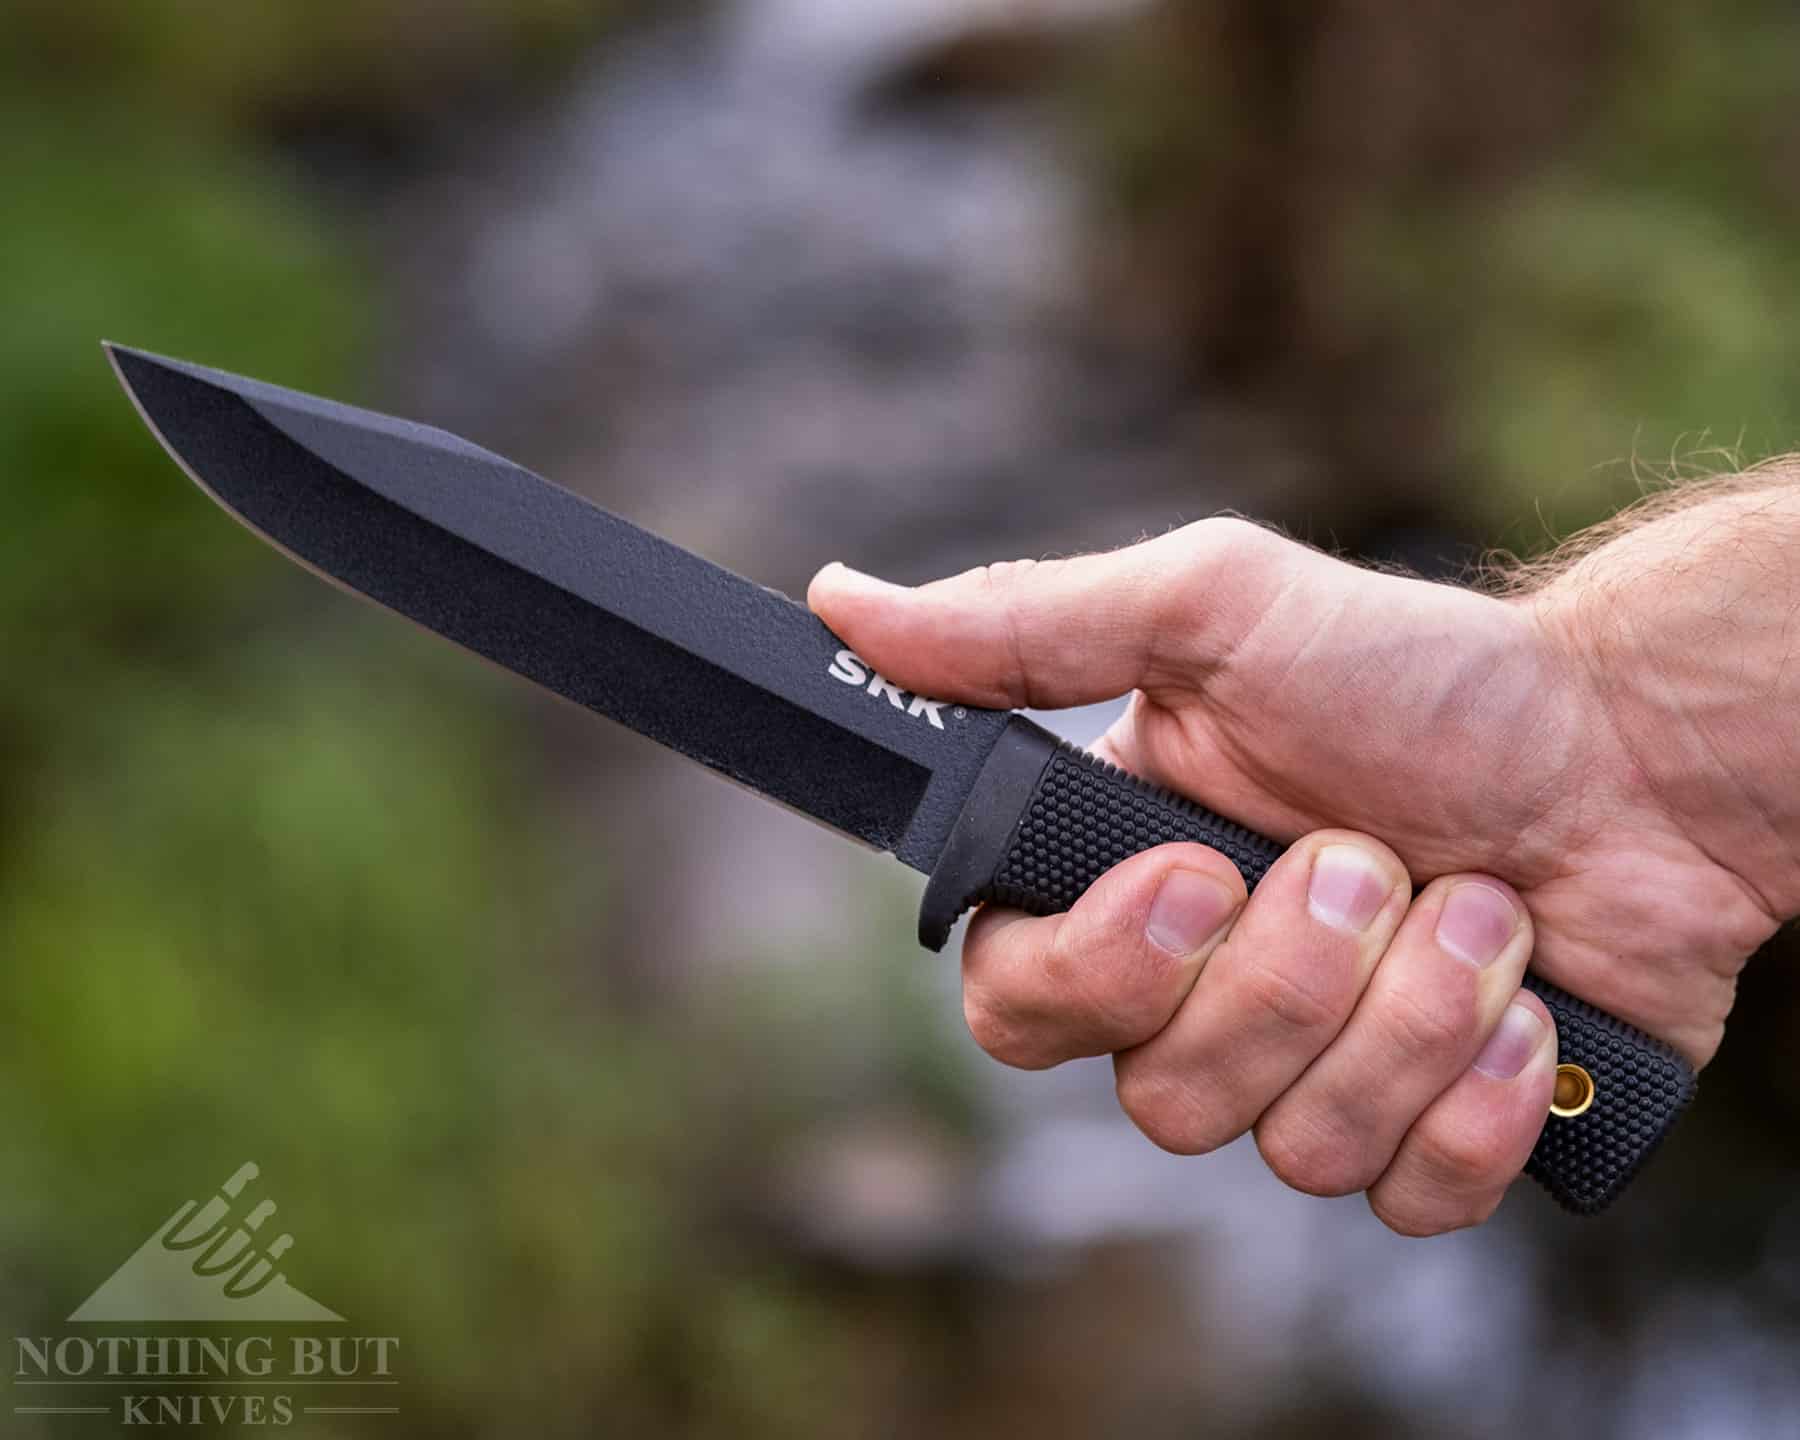 One of the reasons the Cols Steel SRK is such a popular survival knife is that it has a comfortable handle. 